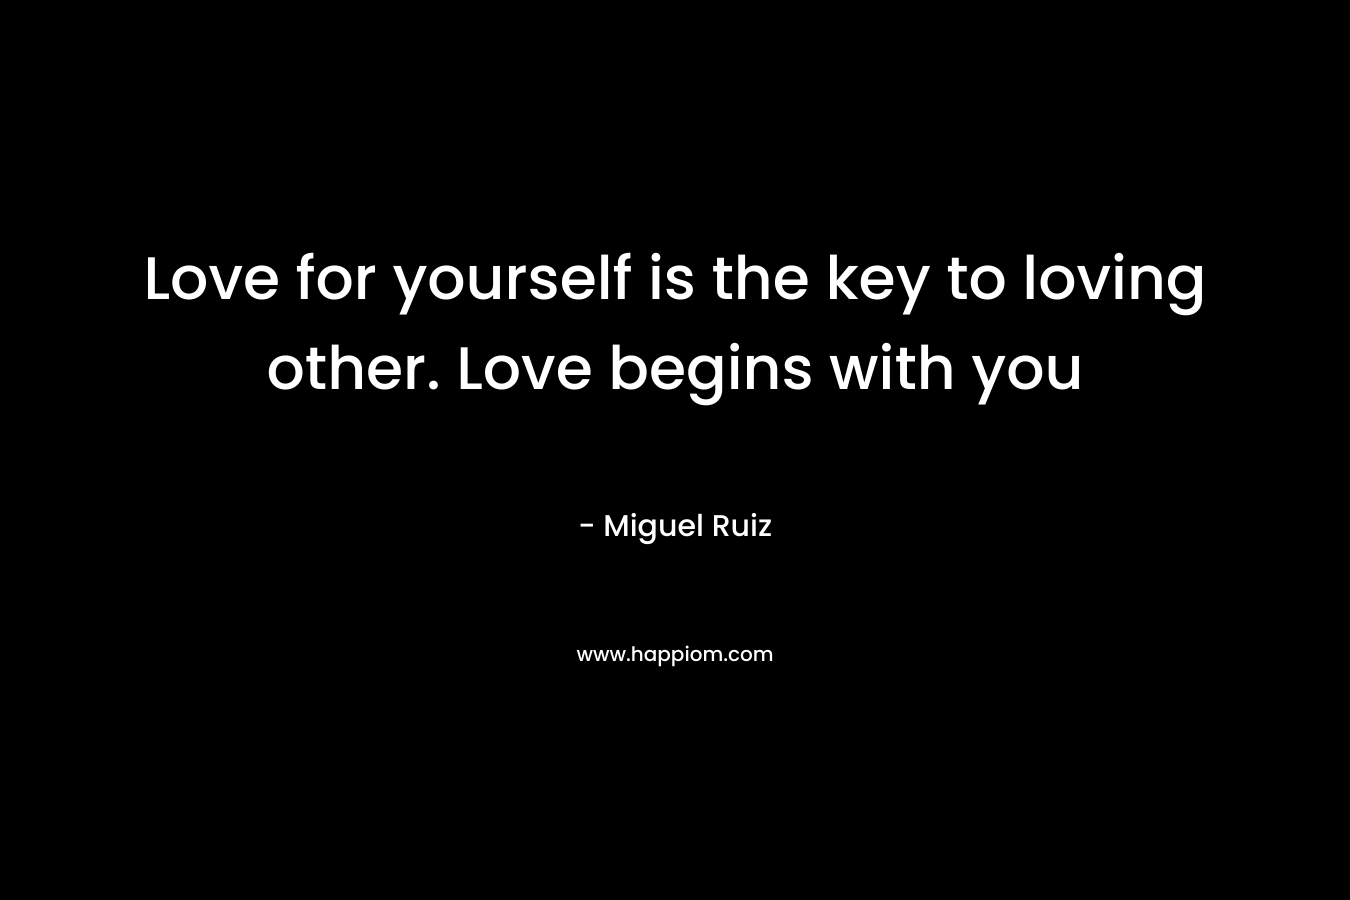 Love for yourself is the key to loving other. Love begins with you – Miguel Ruiz